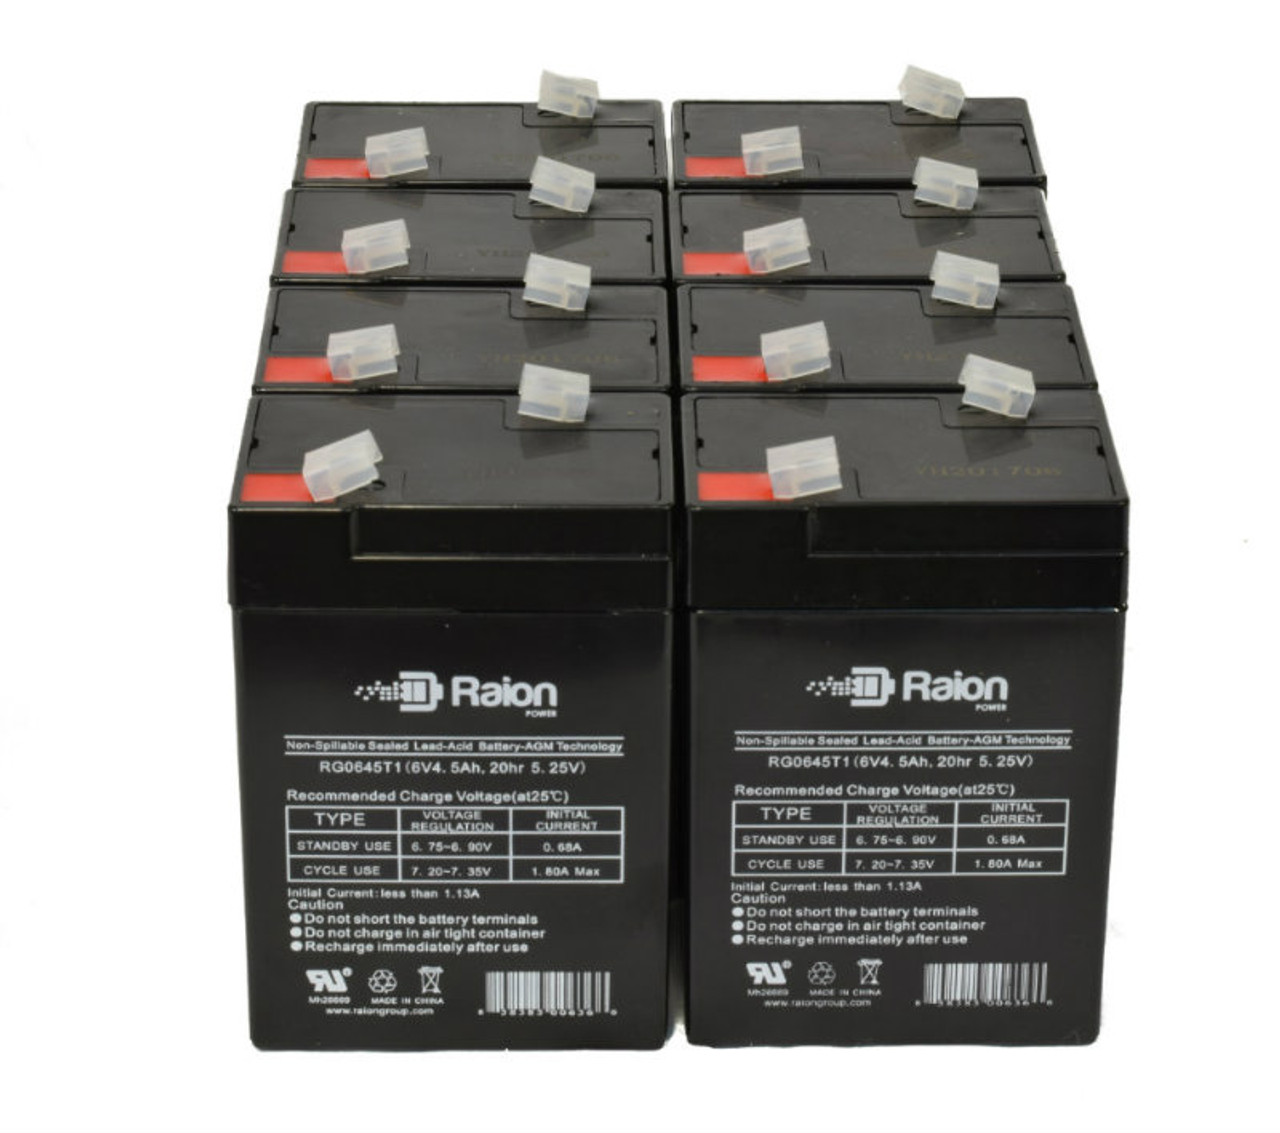 Raion Power 6V 4.5Ah Replacement Emergency Light Battery for Chloride CEL - 8 Pack